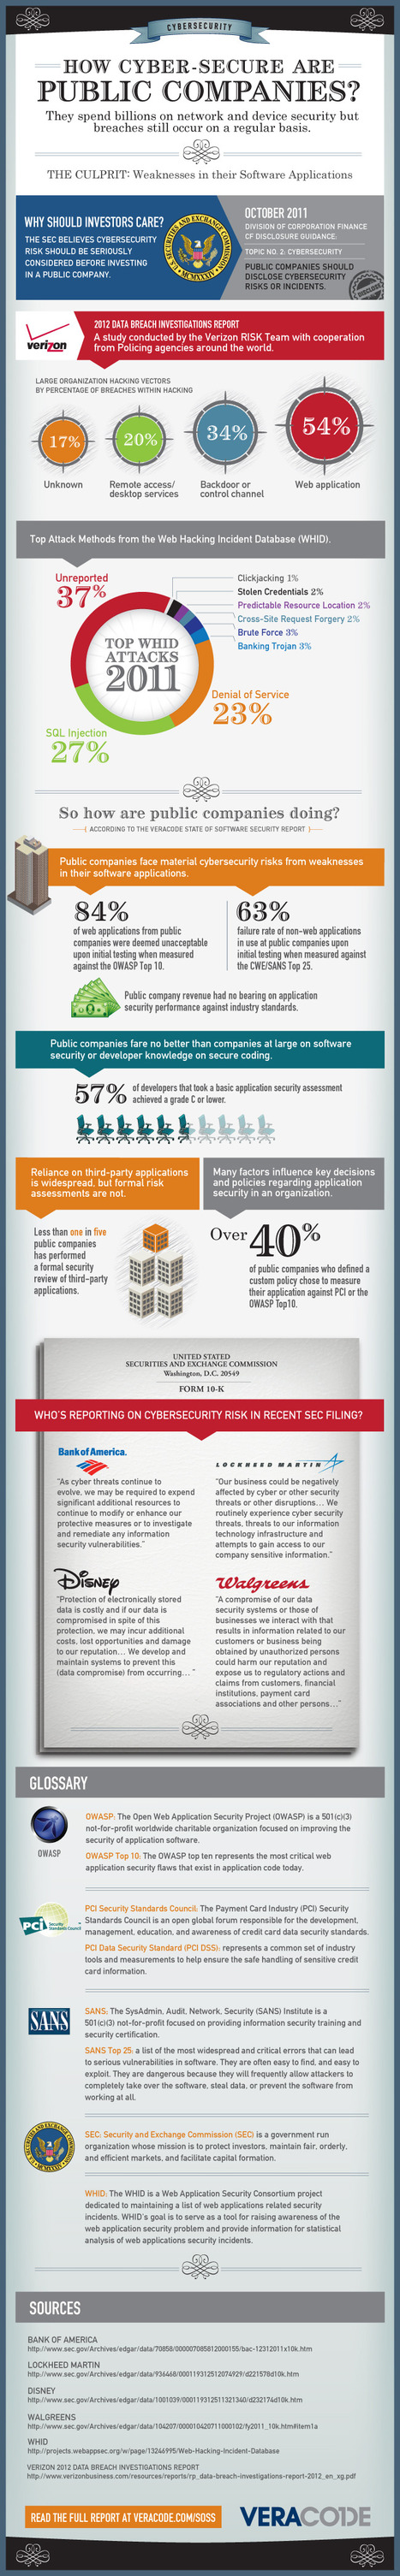 Infographic: How cyber-secure are public companies? | 21st Century Learning and Teaching | Scoop.it